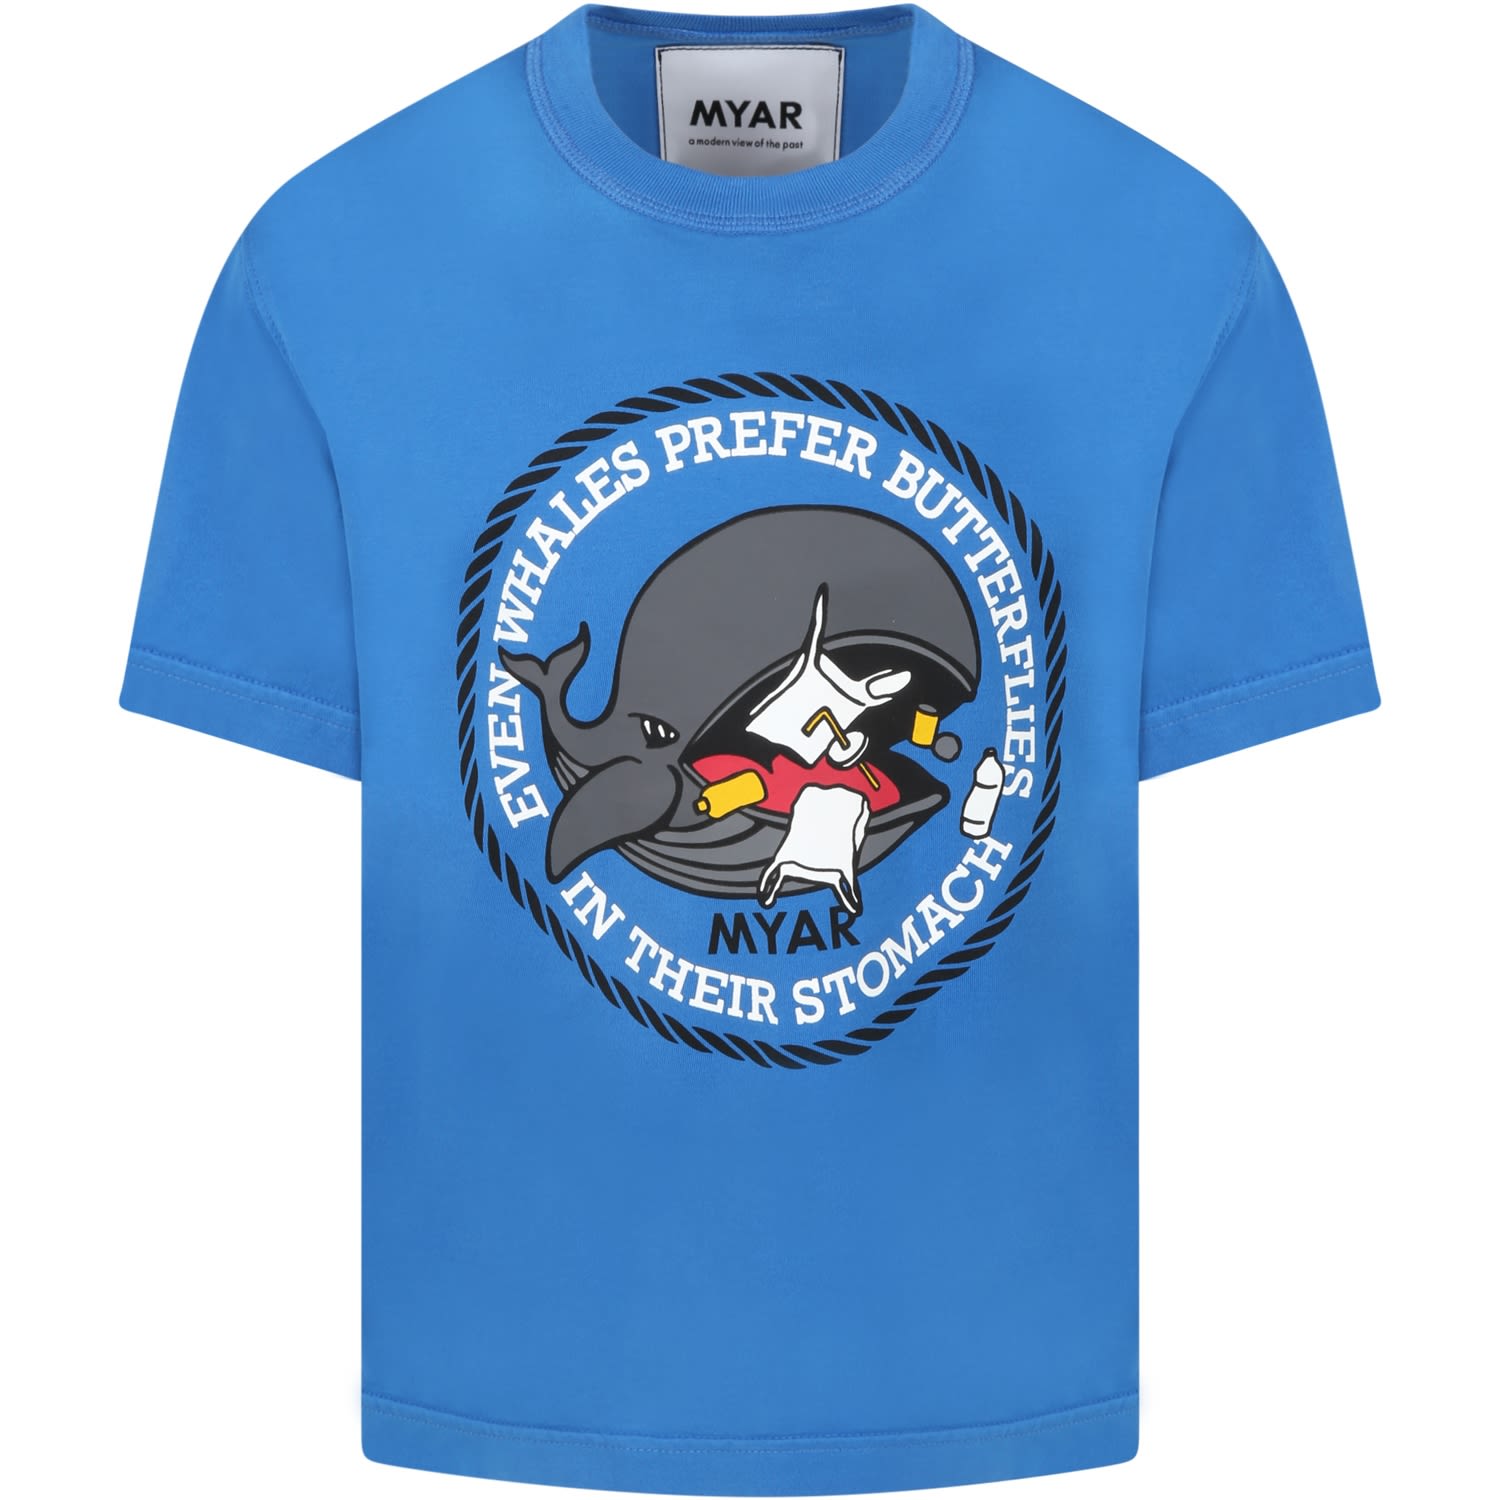 MYAR Blue T-shirt For Boy With Whale